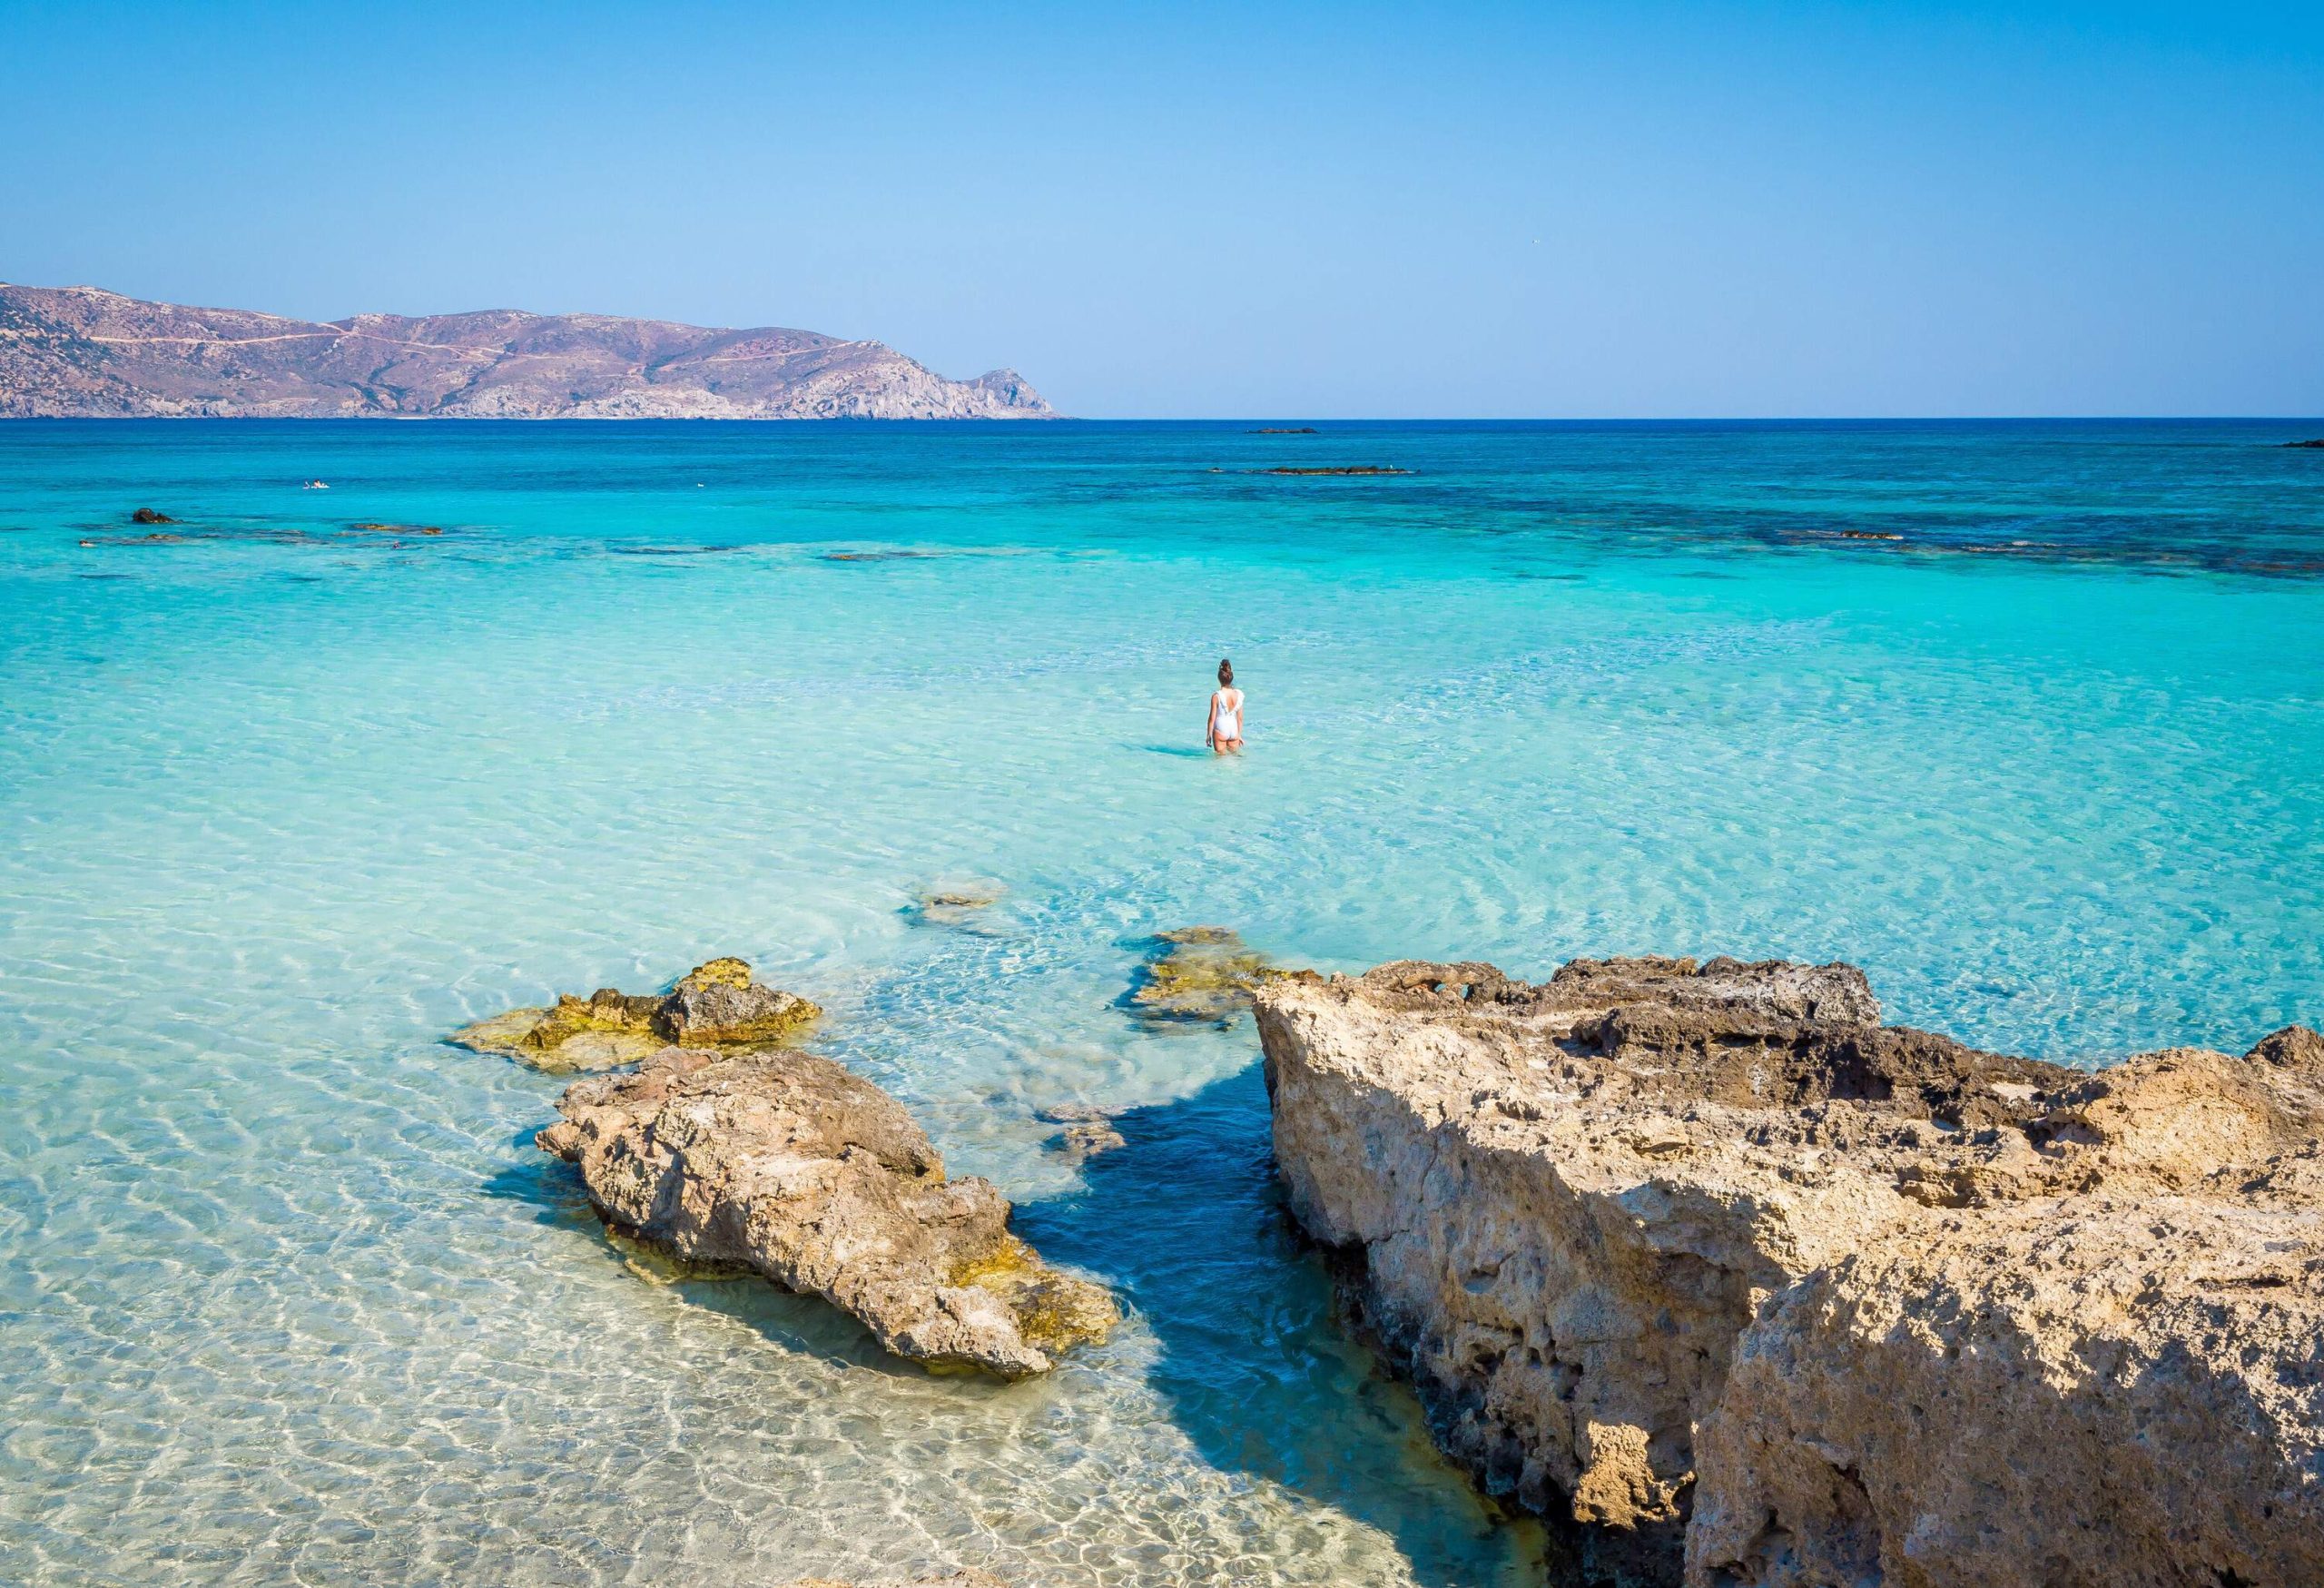 A picturesque paradise of turquoise beach with rock formations.